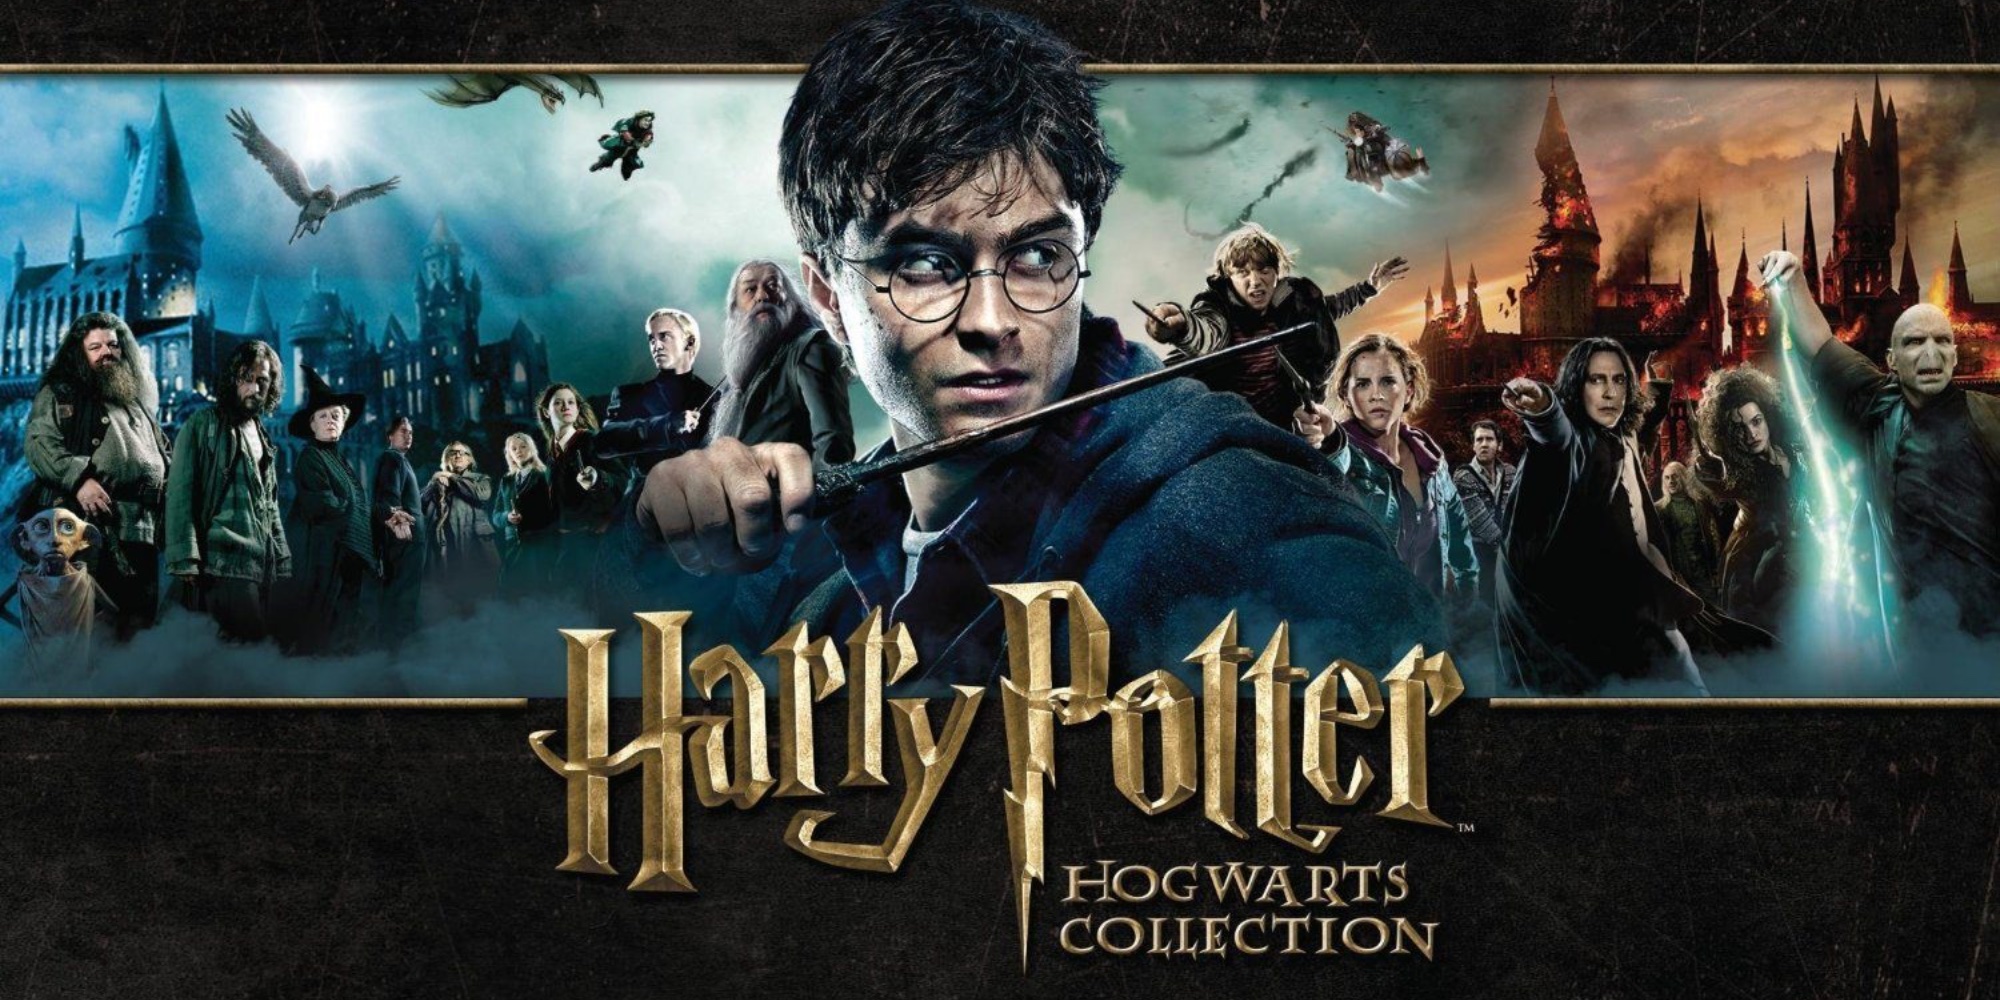 takes up to 70% off Harry Potter film sets from $22.50 for Prime Day